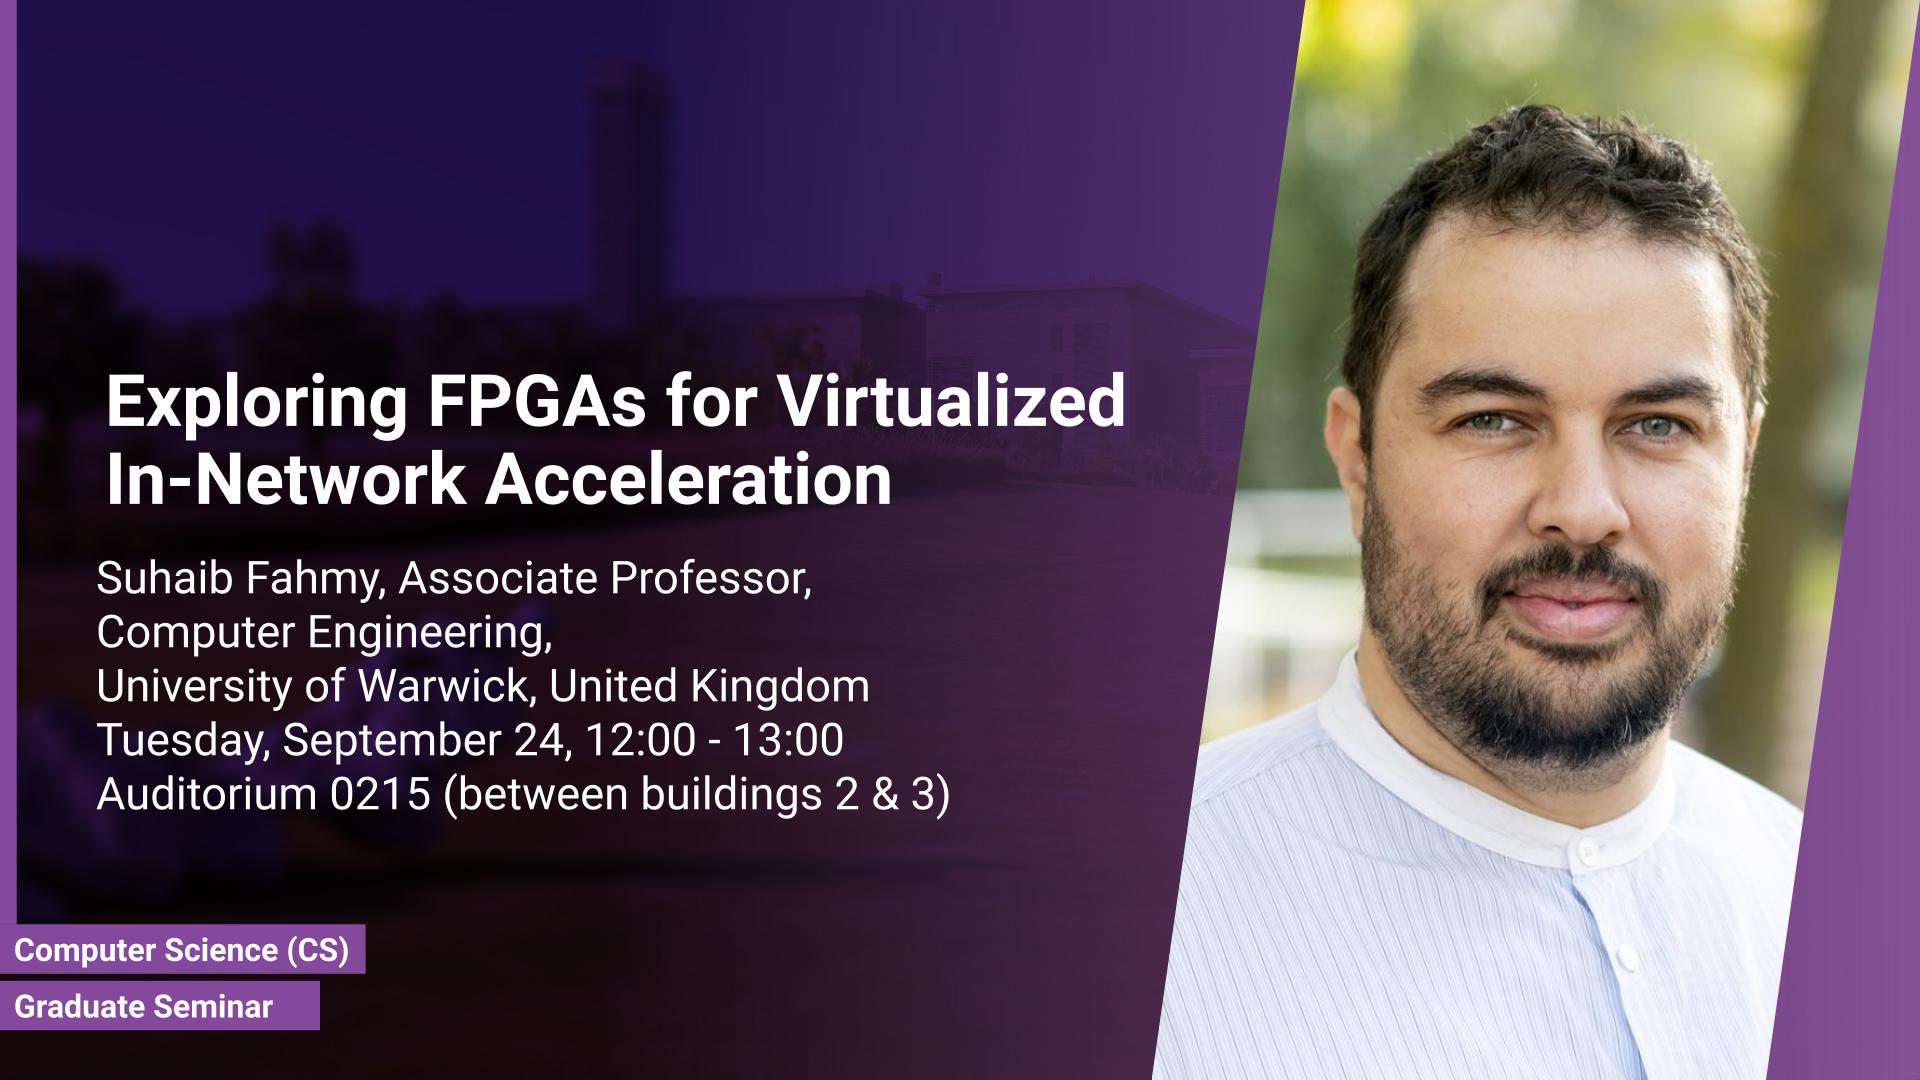 KAUST CEMSE CS Graduate Seminar Suhaib Fahmy Exploring FPGAs for Virtualized In Network Acceleration